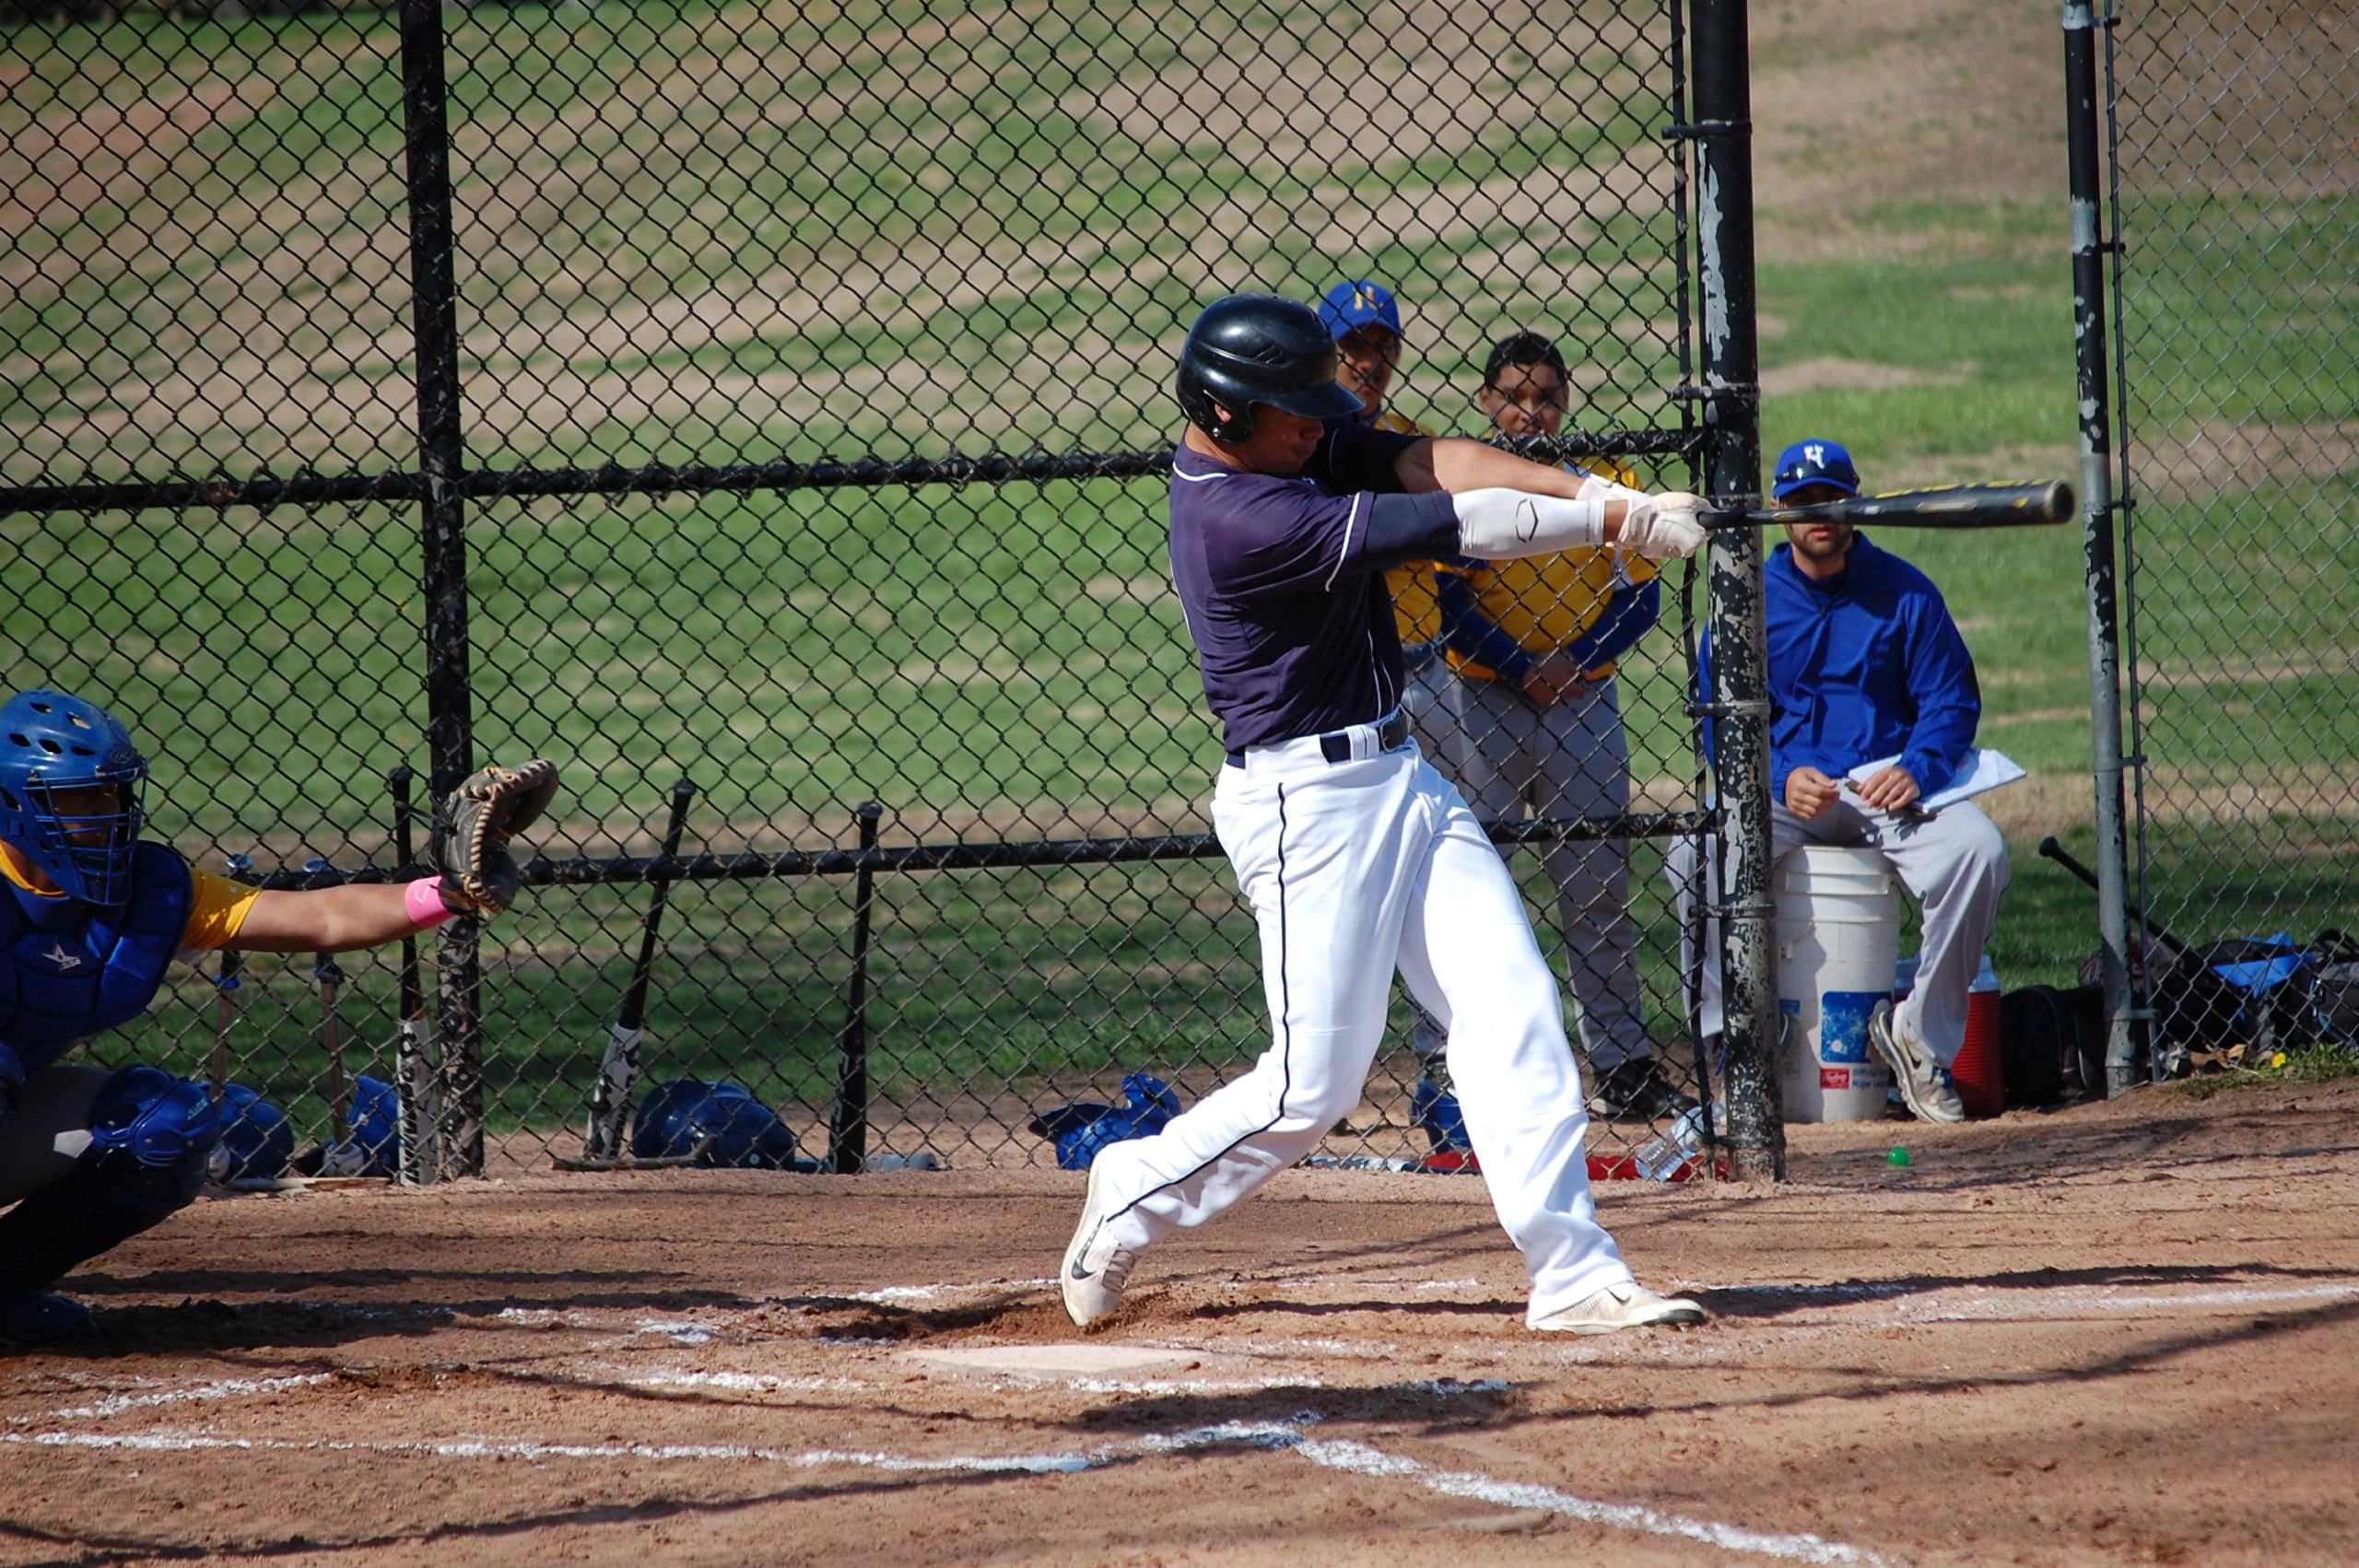 Topher Brown blasts a 2 run homer in the 2nd inning Monday!